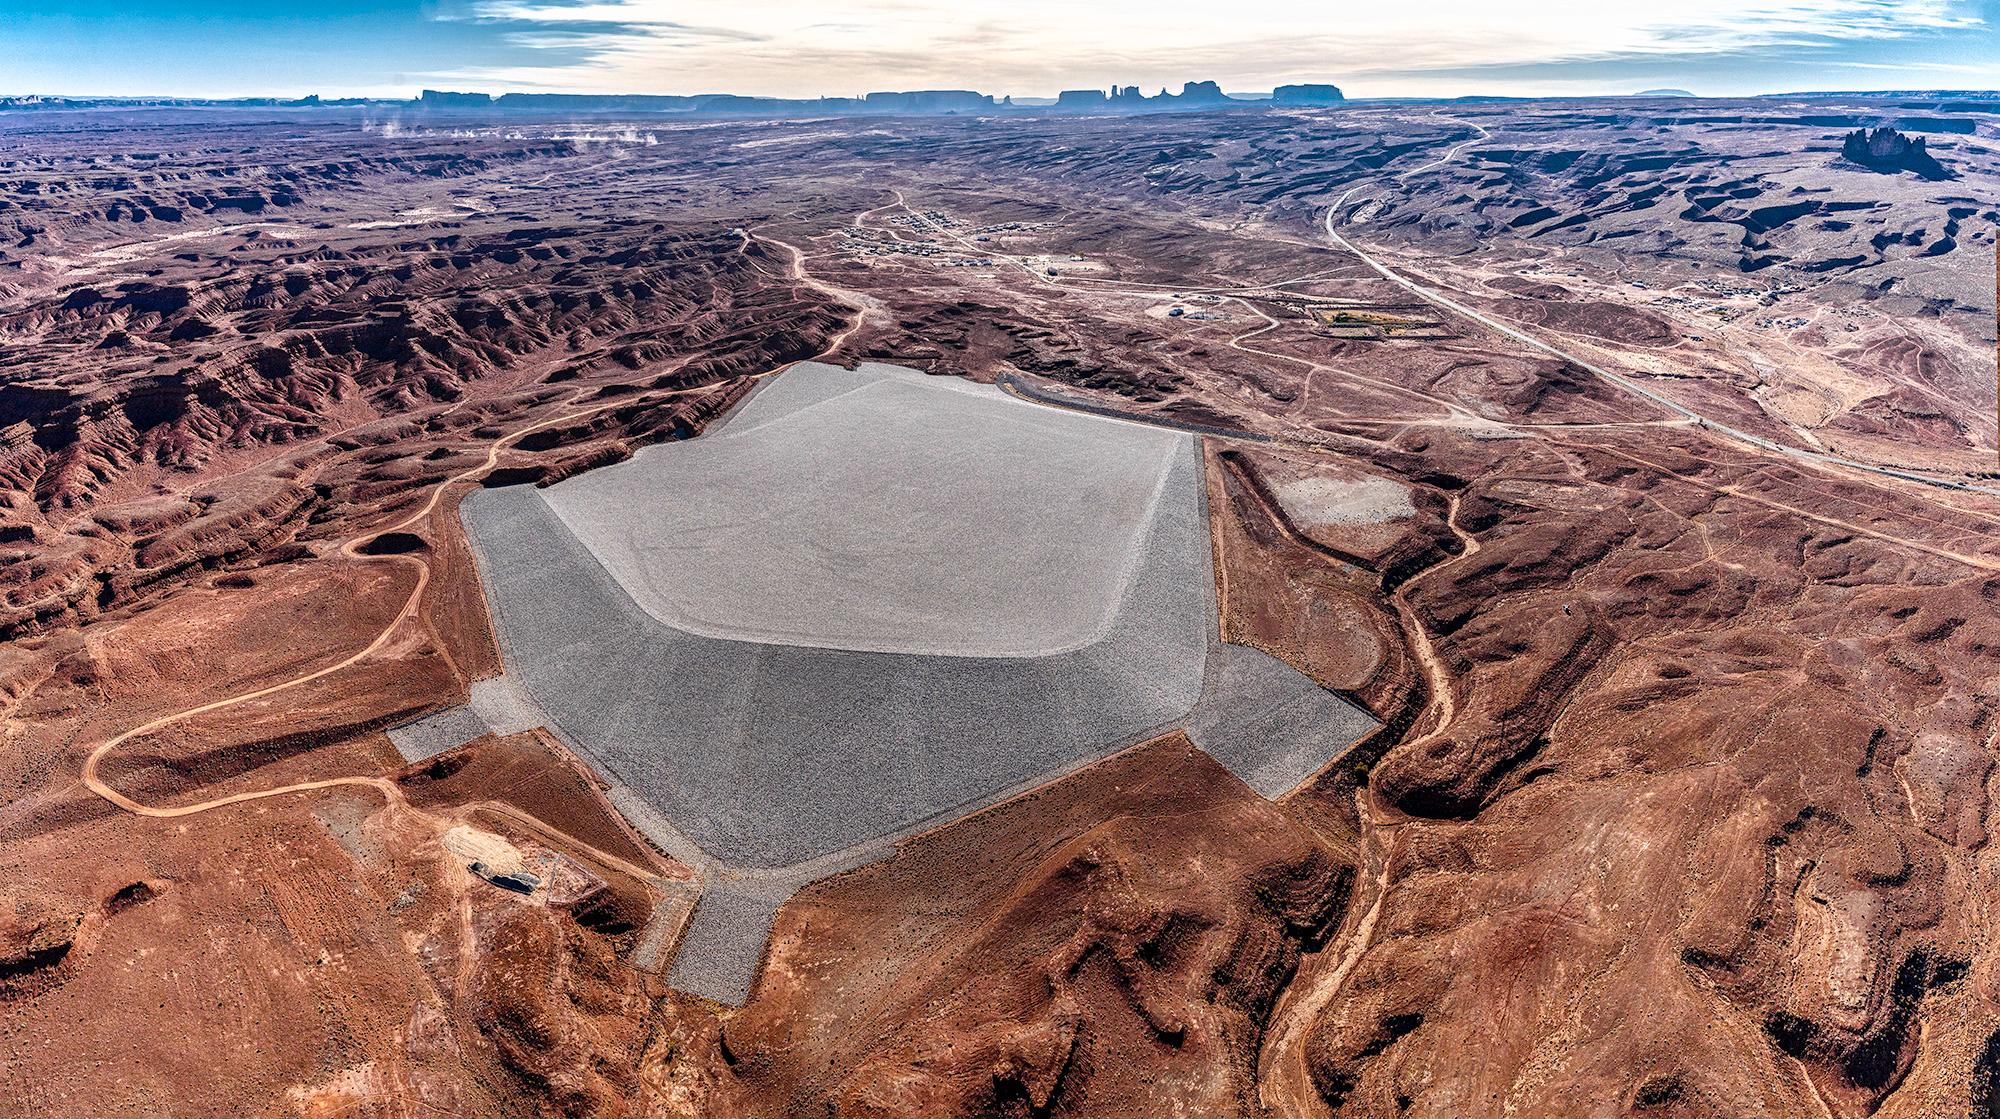 Mexican Hat Disposal Cell, Cylindrical Projection, Halchita, UT, Navajo Nation - Photograph by Will Wilson